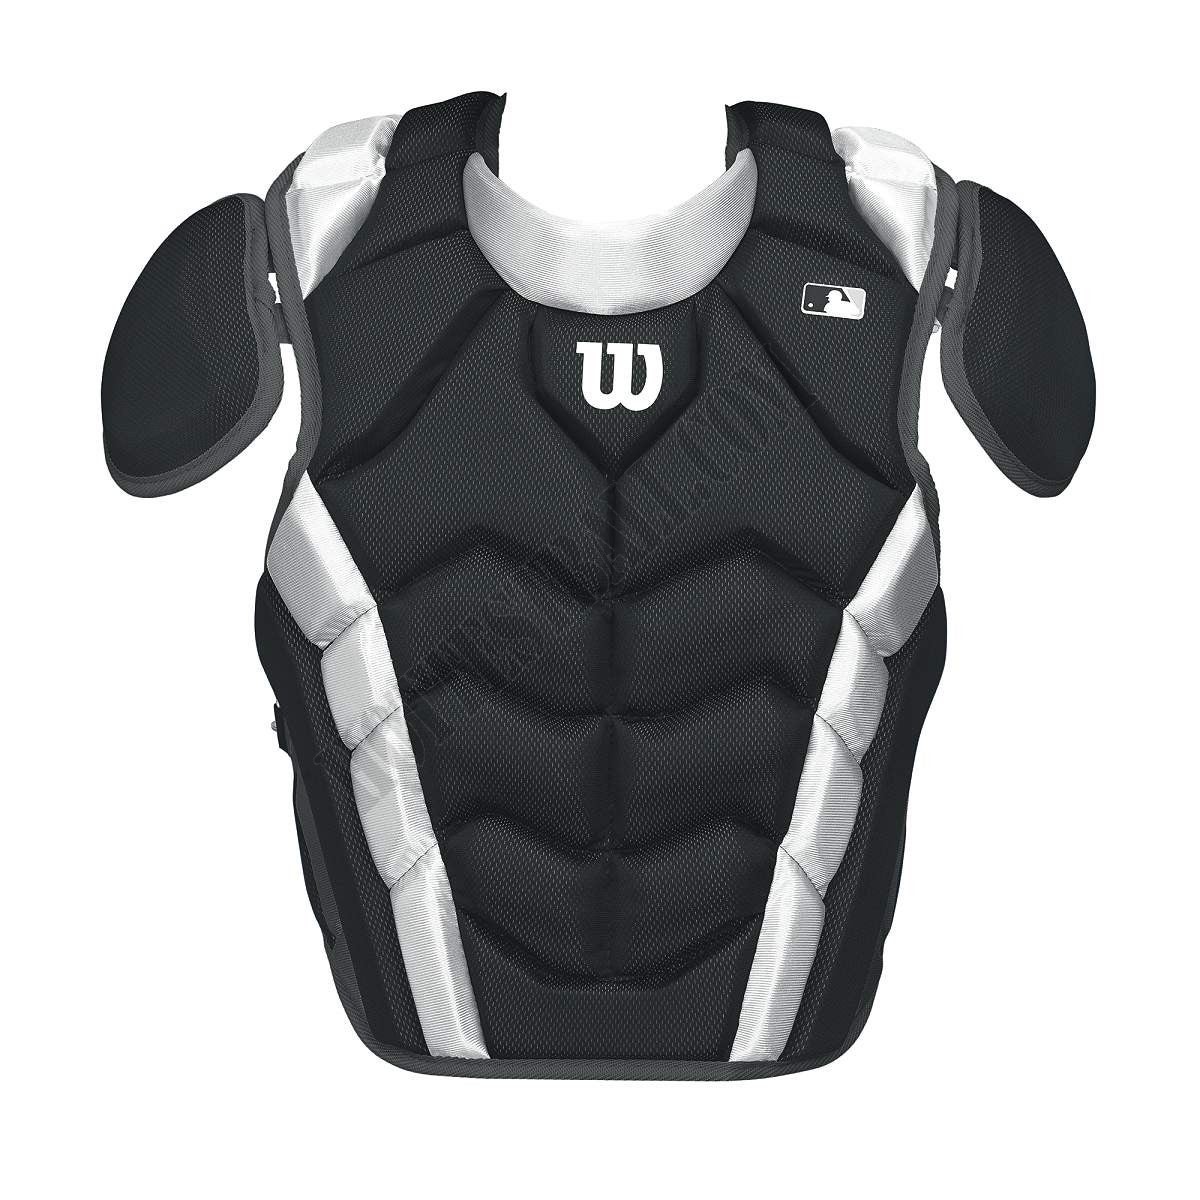 Pro Stock Chest Protector - Wilson Discount Store - -3